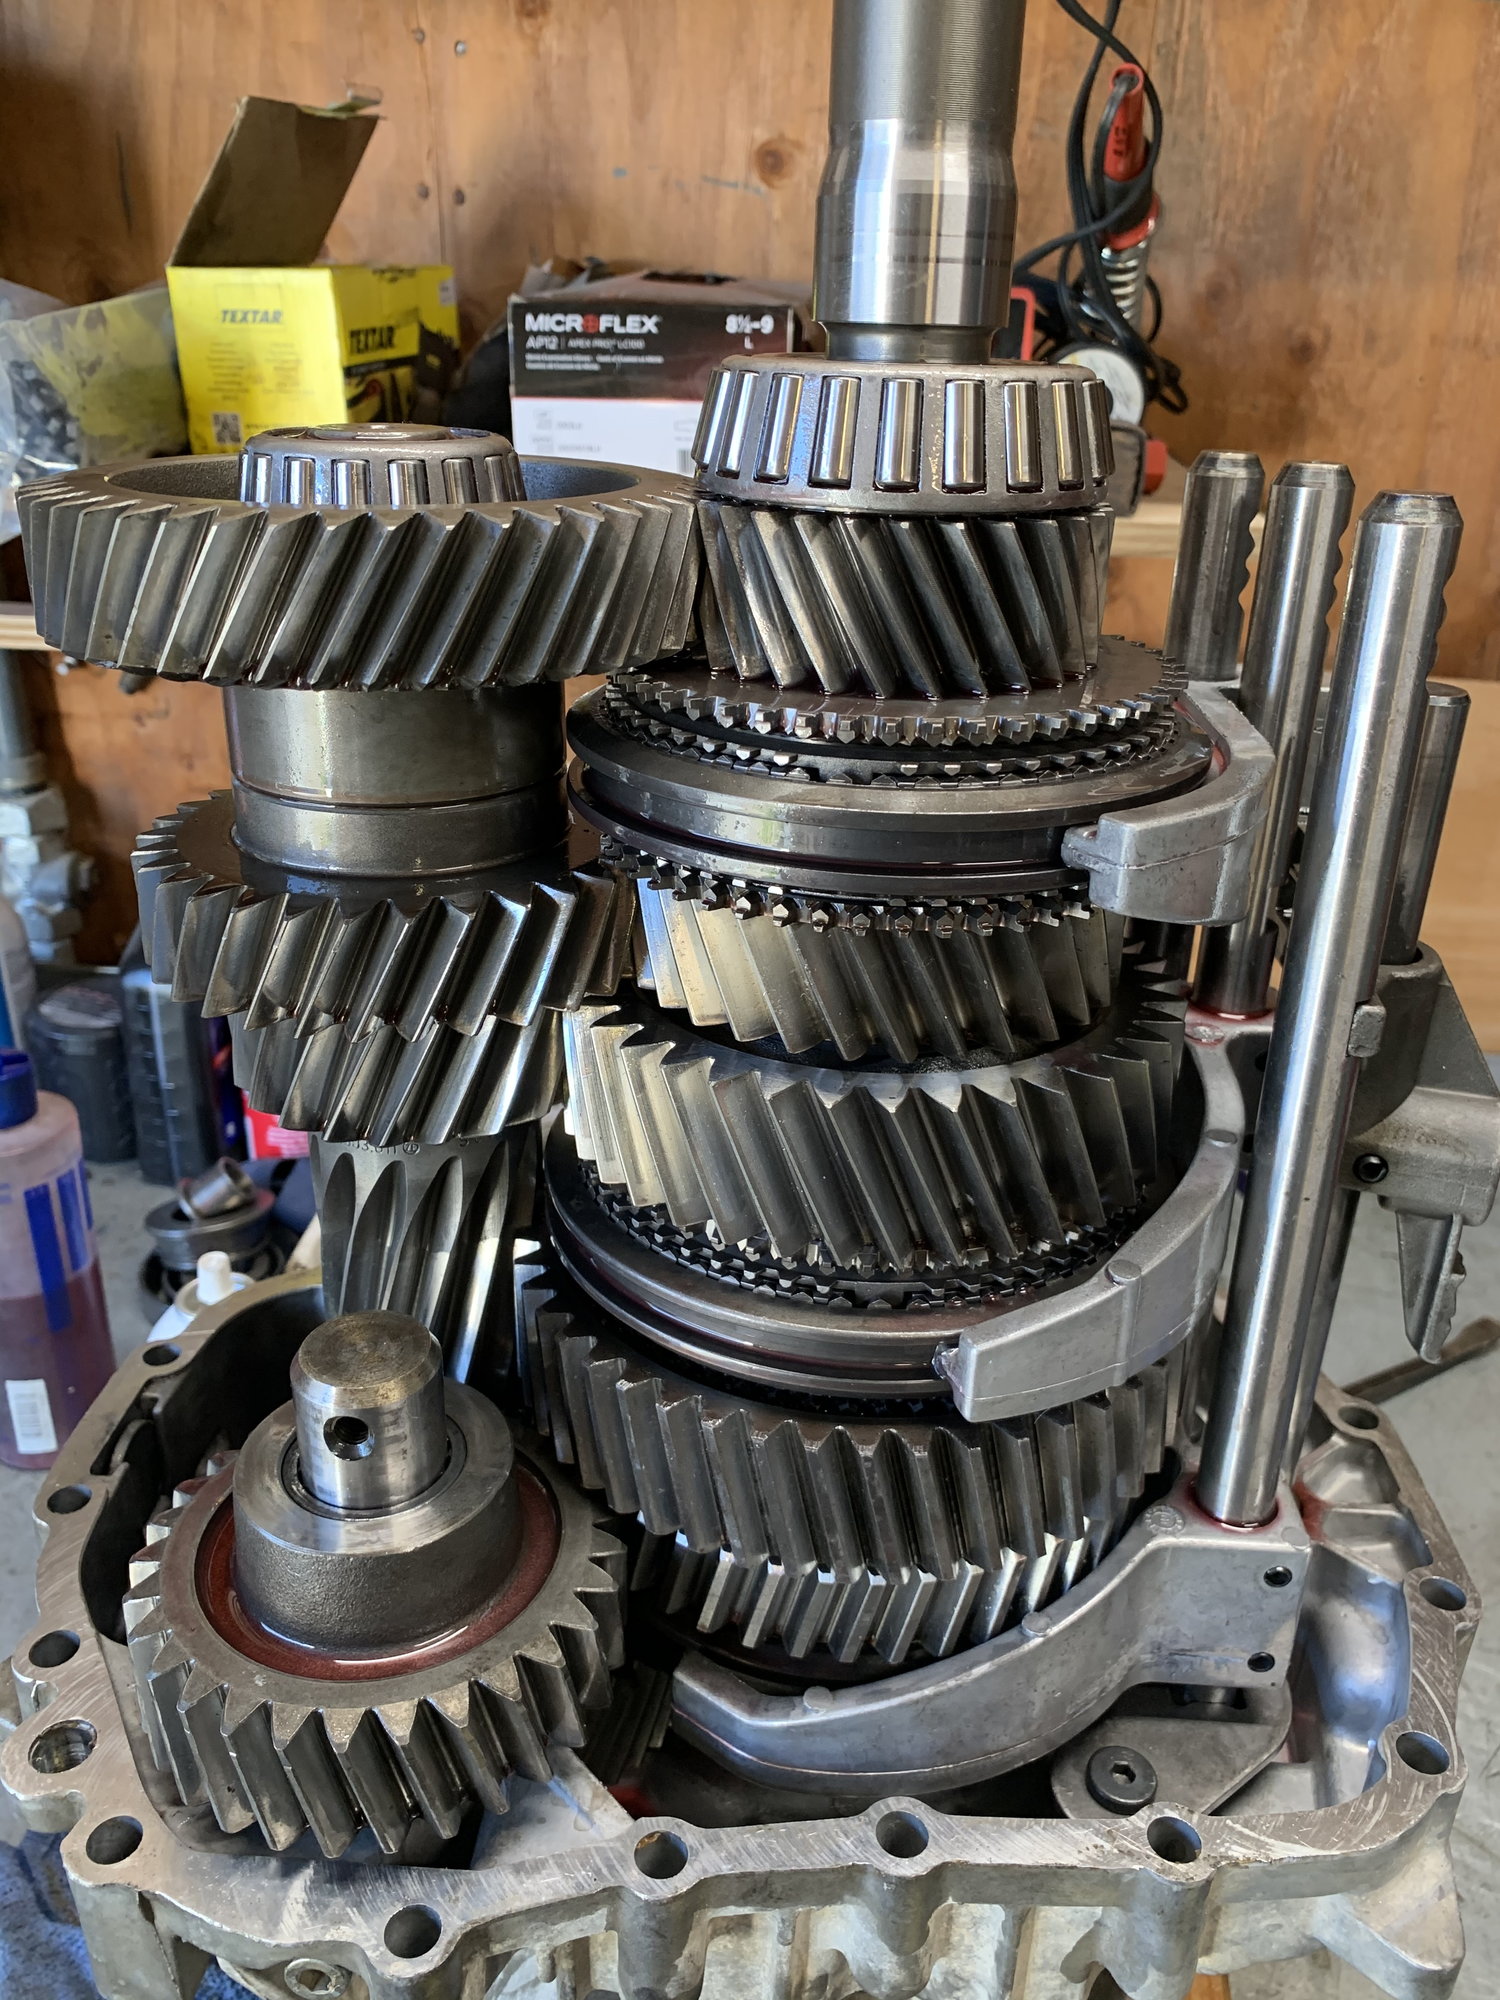 Drivetrain - Rebuilt ZF5 Manual Transmissions - New - 1987 to 2010 Ford All Models - Long Beach, CA 90802, United States